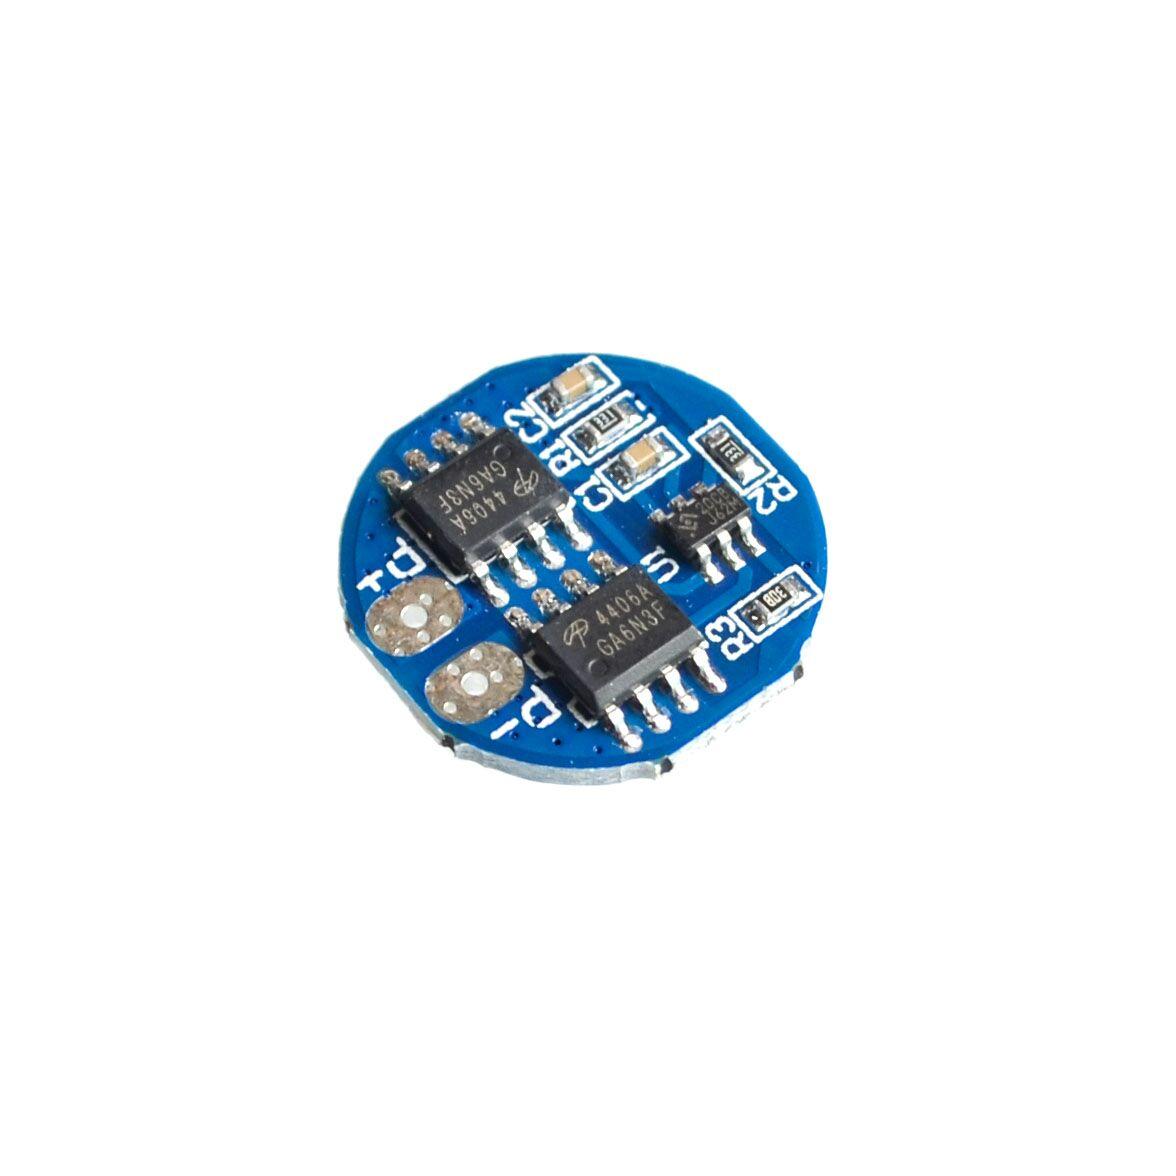 10PCS/LOT 2S 5A Li-ion Lithium Battery 7.4v 8.4V 18650 Charger Protection Board bms pcm for li-ion lipo battery cell pack